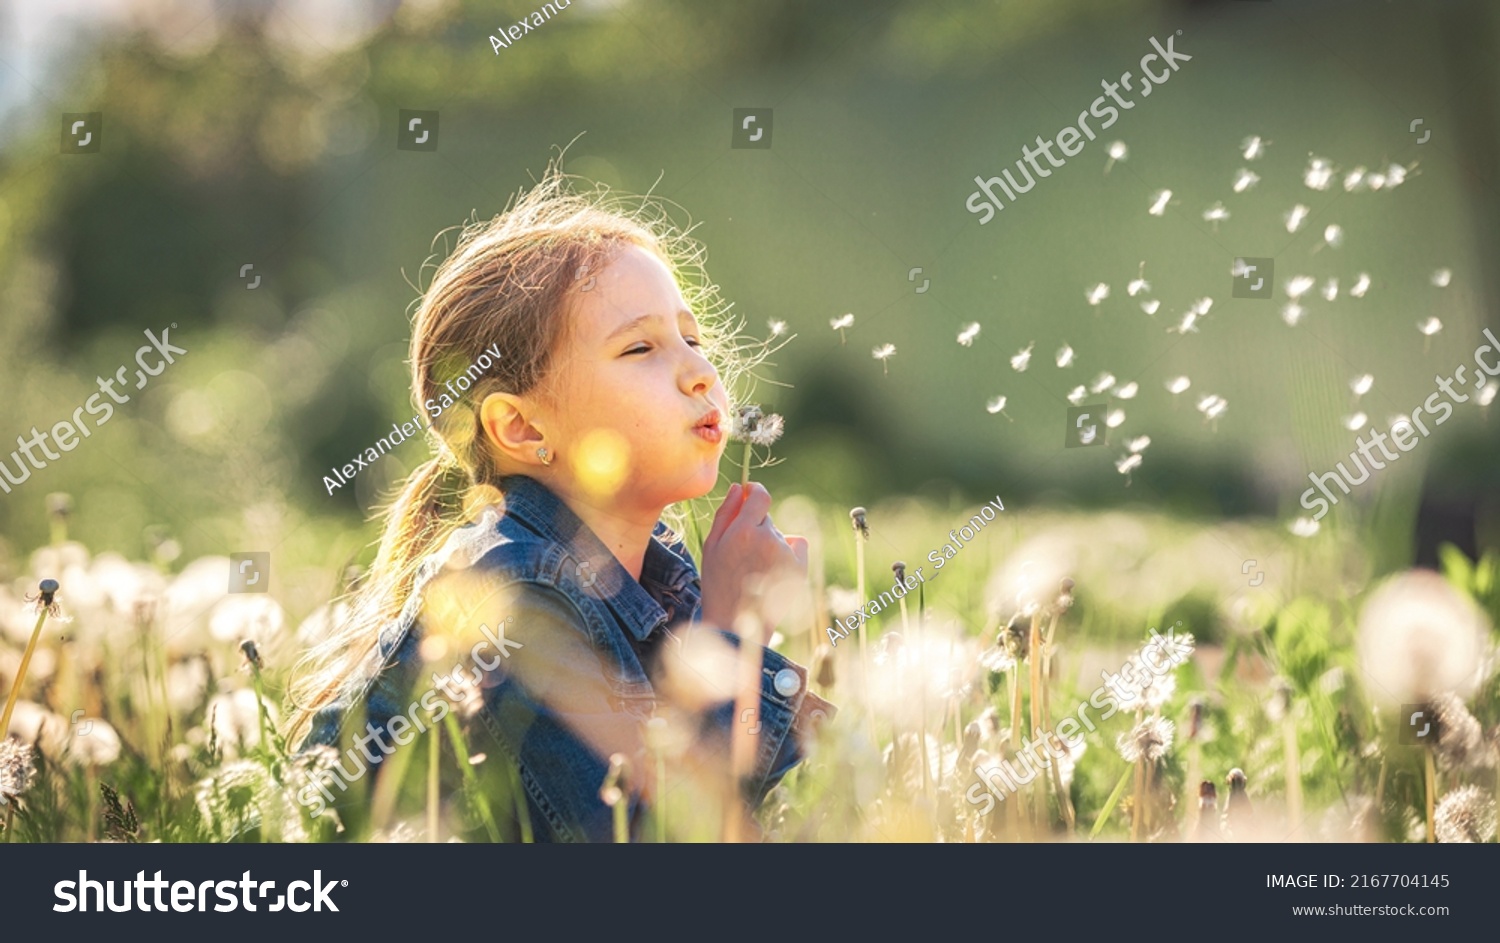 cute little girl blowing dandelions in a sunny flower meadow . Summer seasonal outdoor activities for children. The child smiles and enjoys summer fun #2167704145